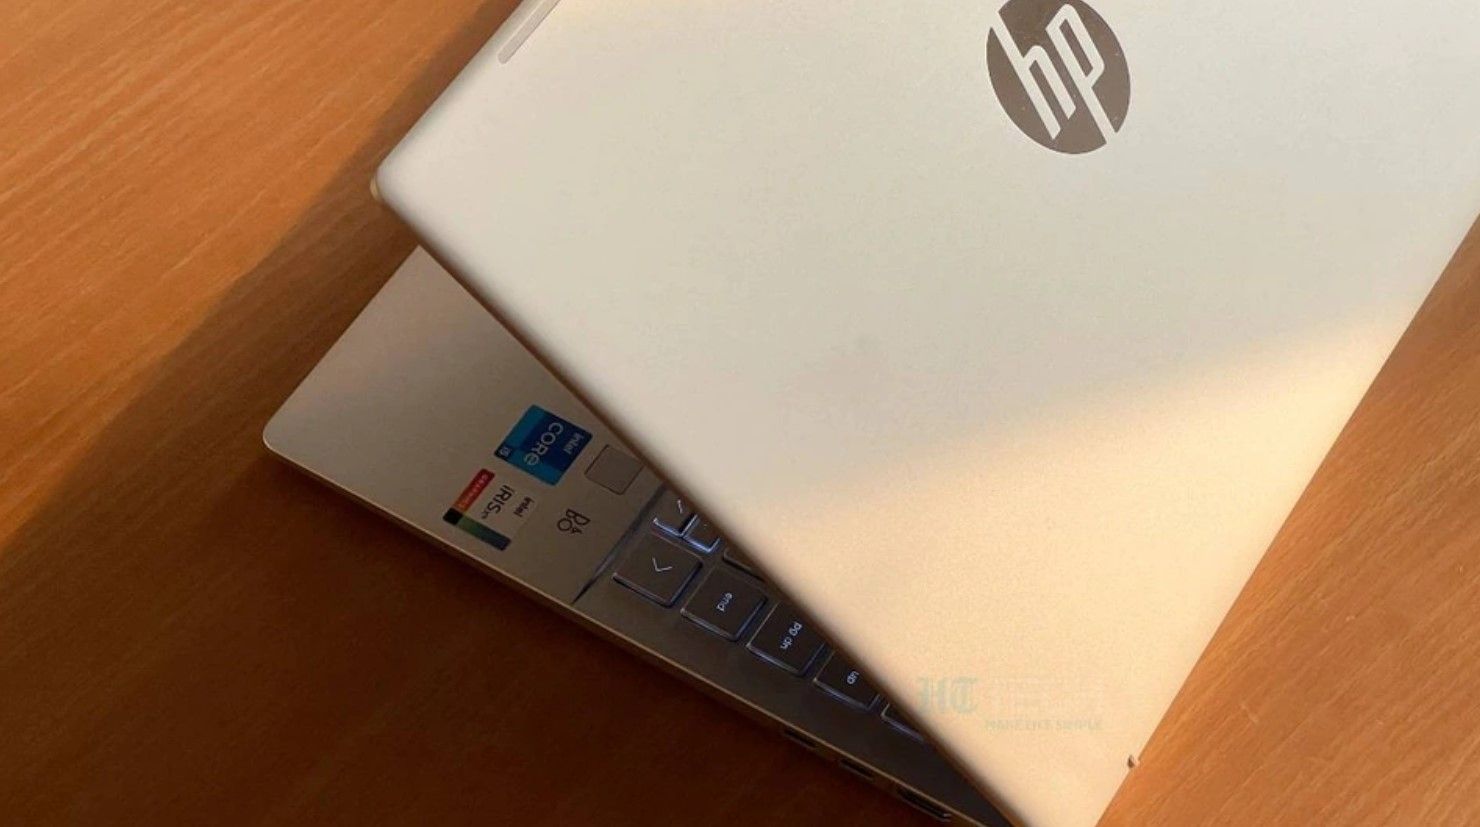 How to factory reset HP laptop